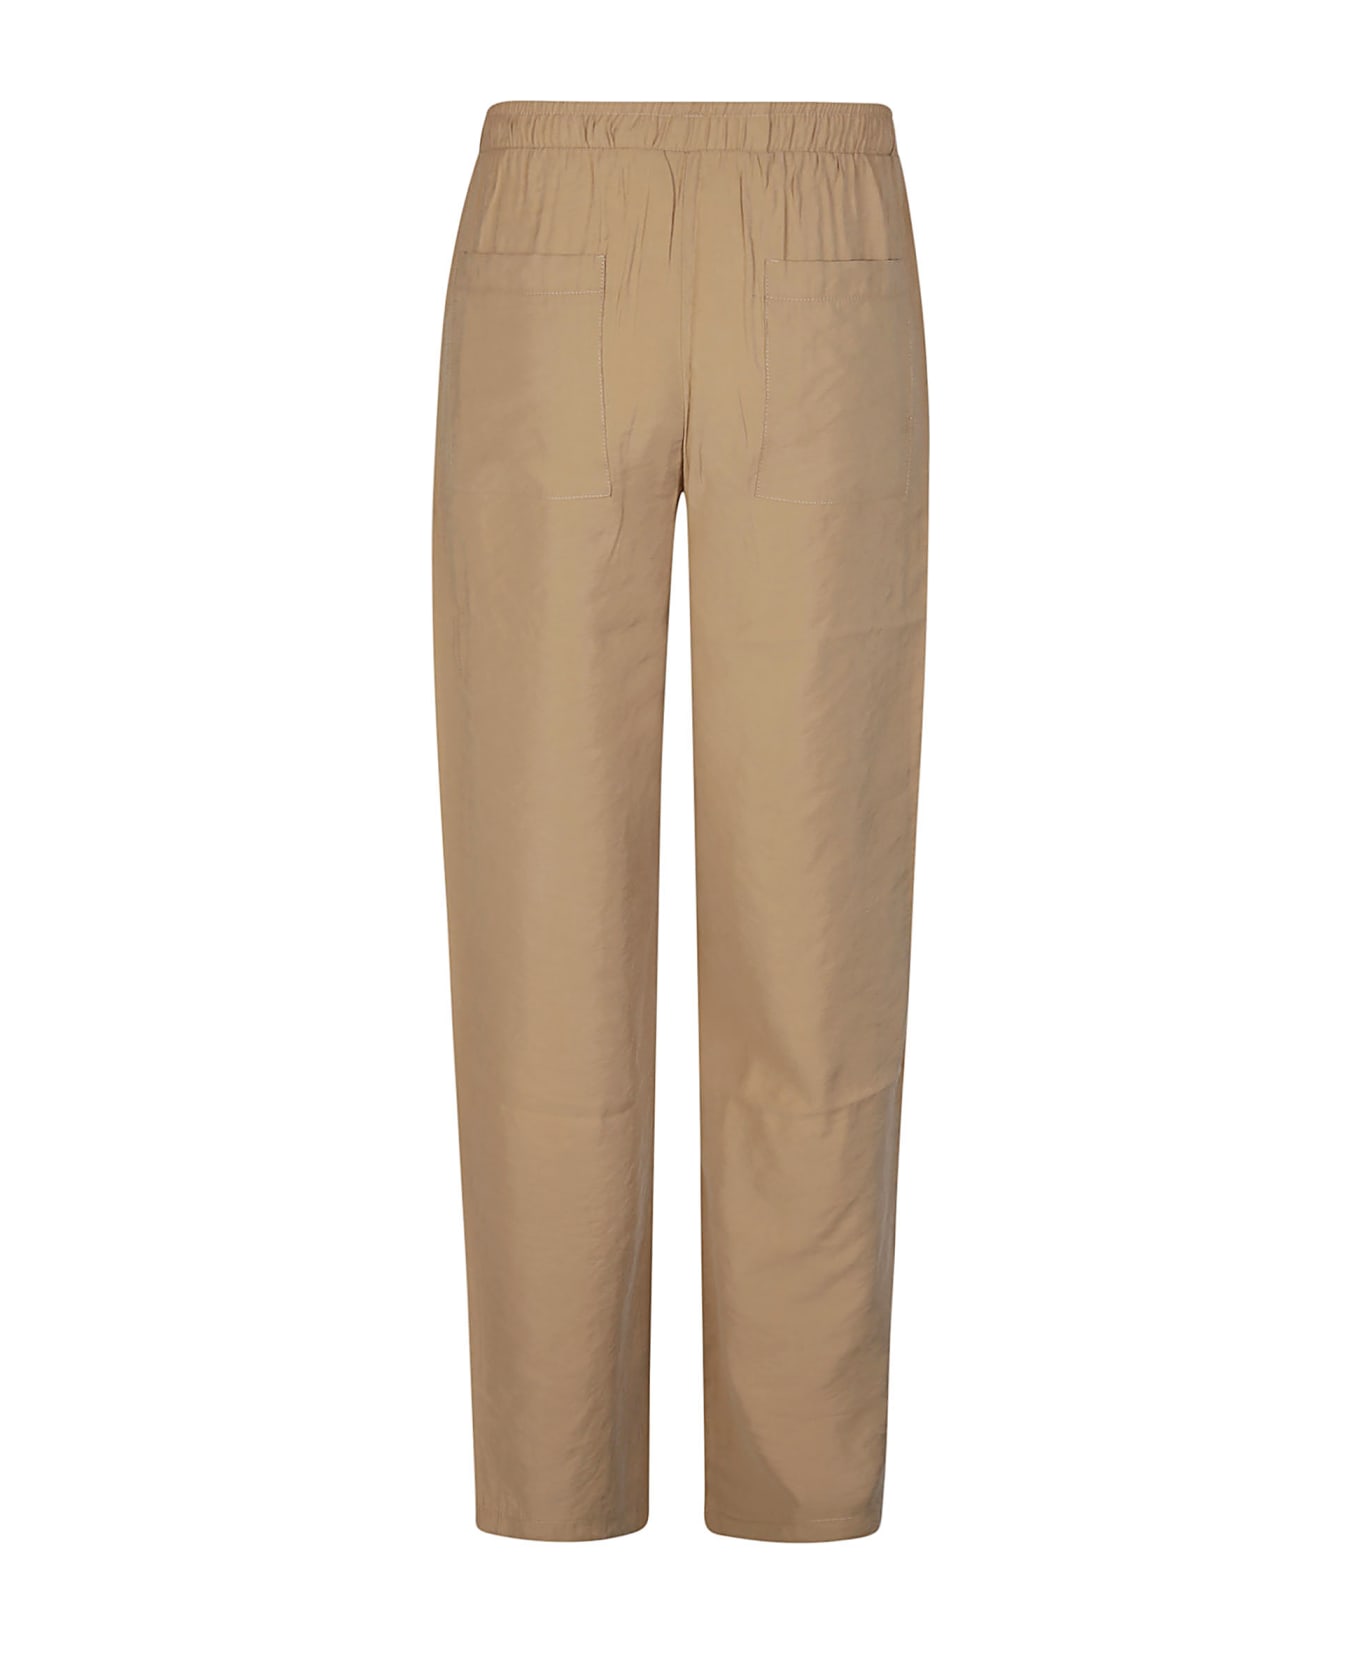 Family First Milano Soft Cupro Pant - Beige